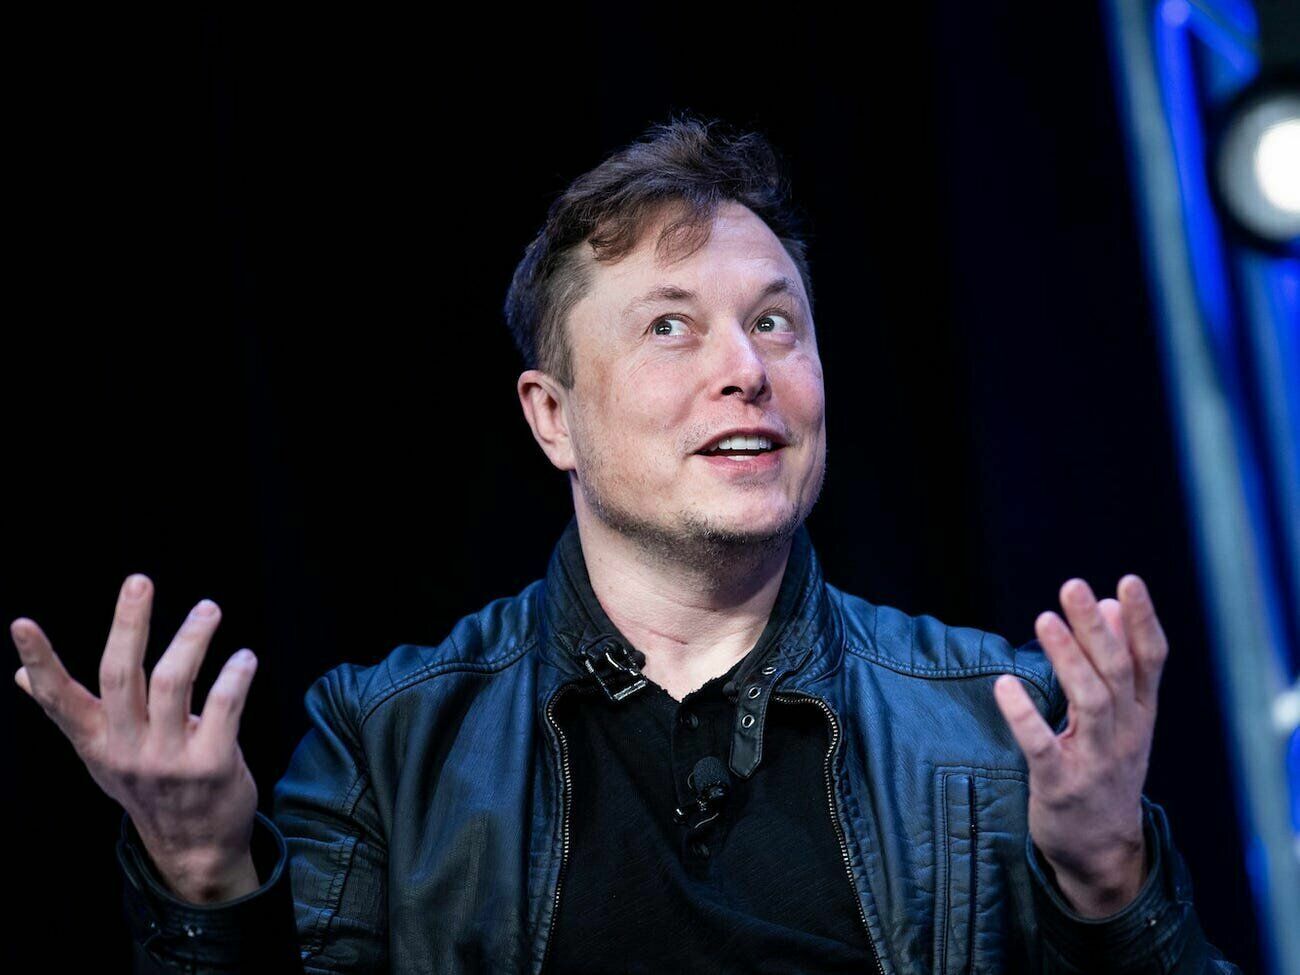 Forbes named Elon Musk the richest man in world history